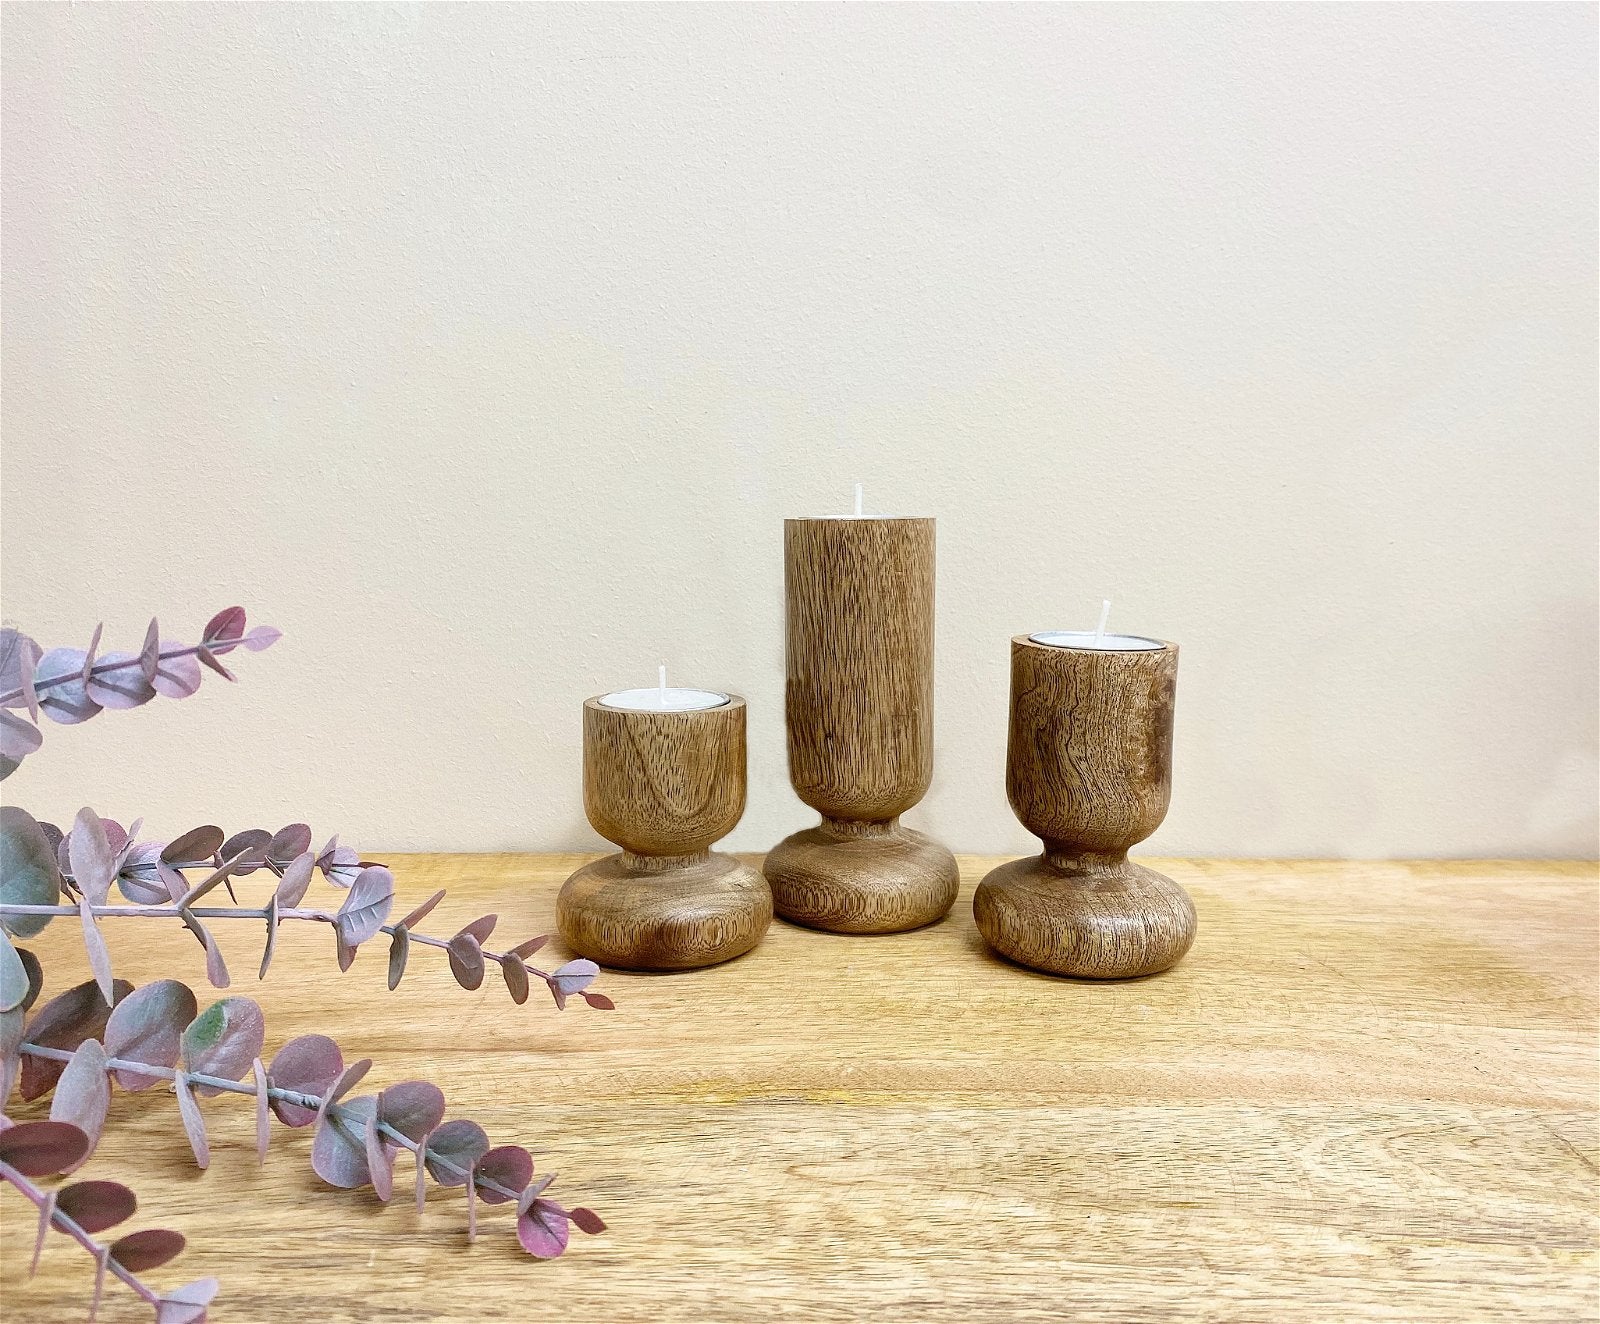 Set of Three Wooden Candlestick or Tea Light Holders Willow and Wine